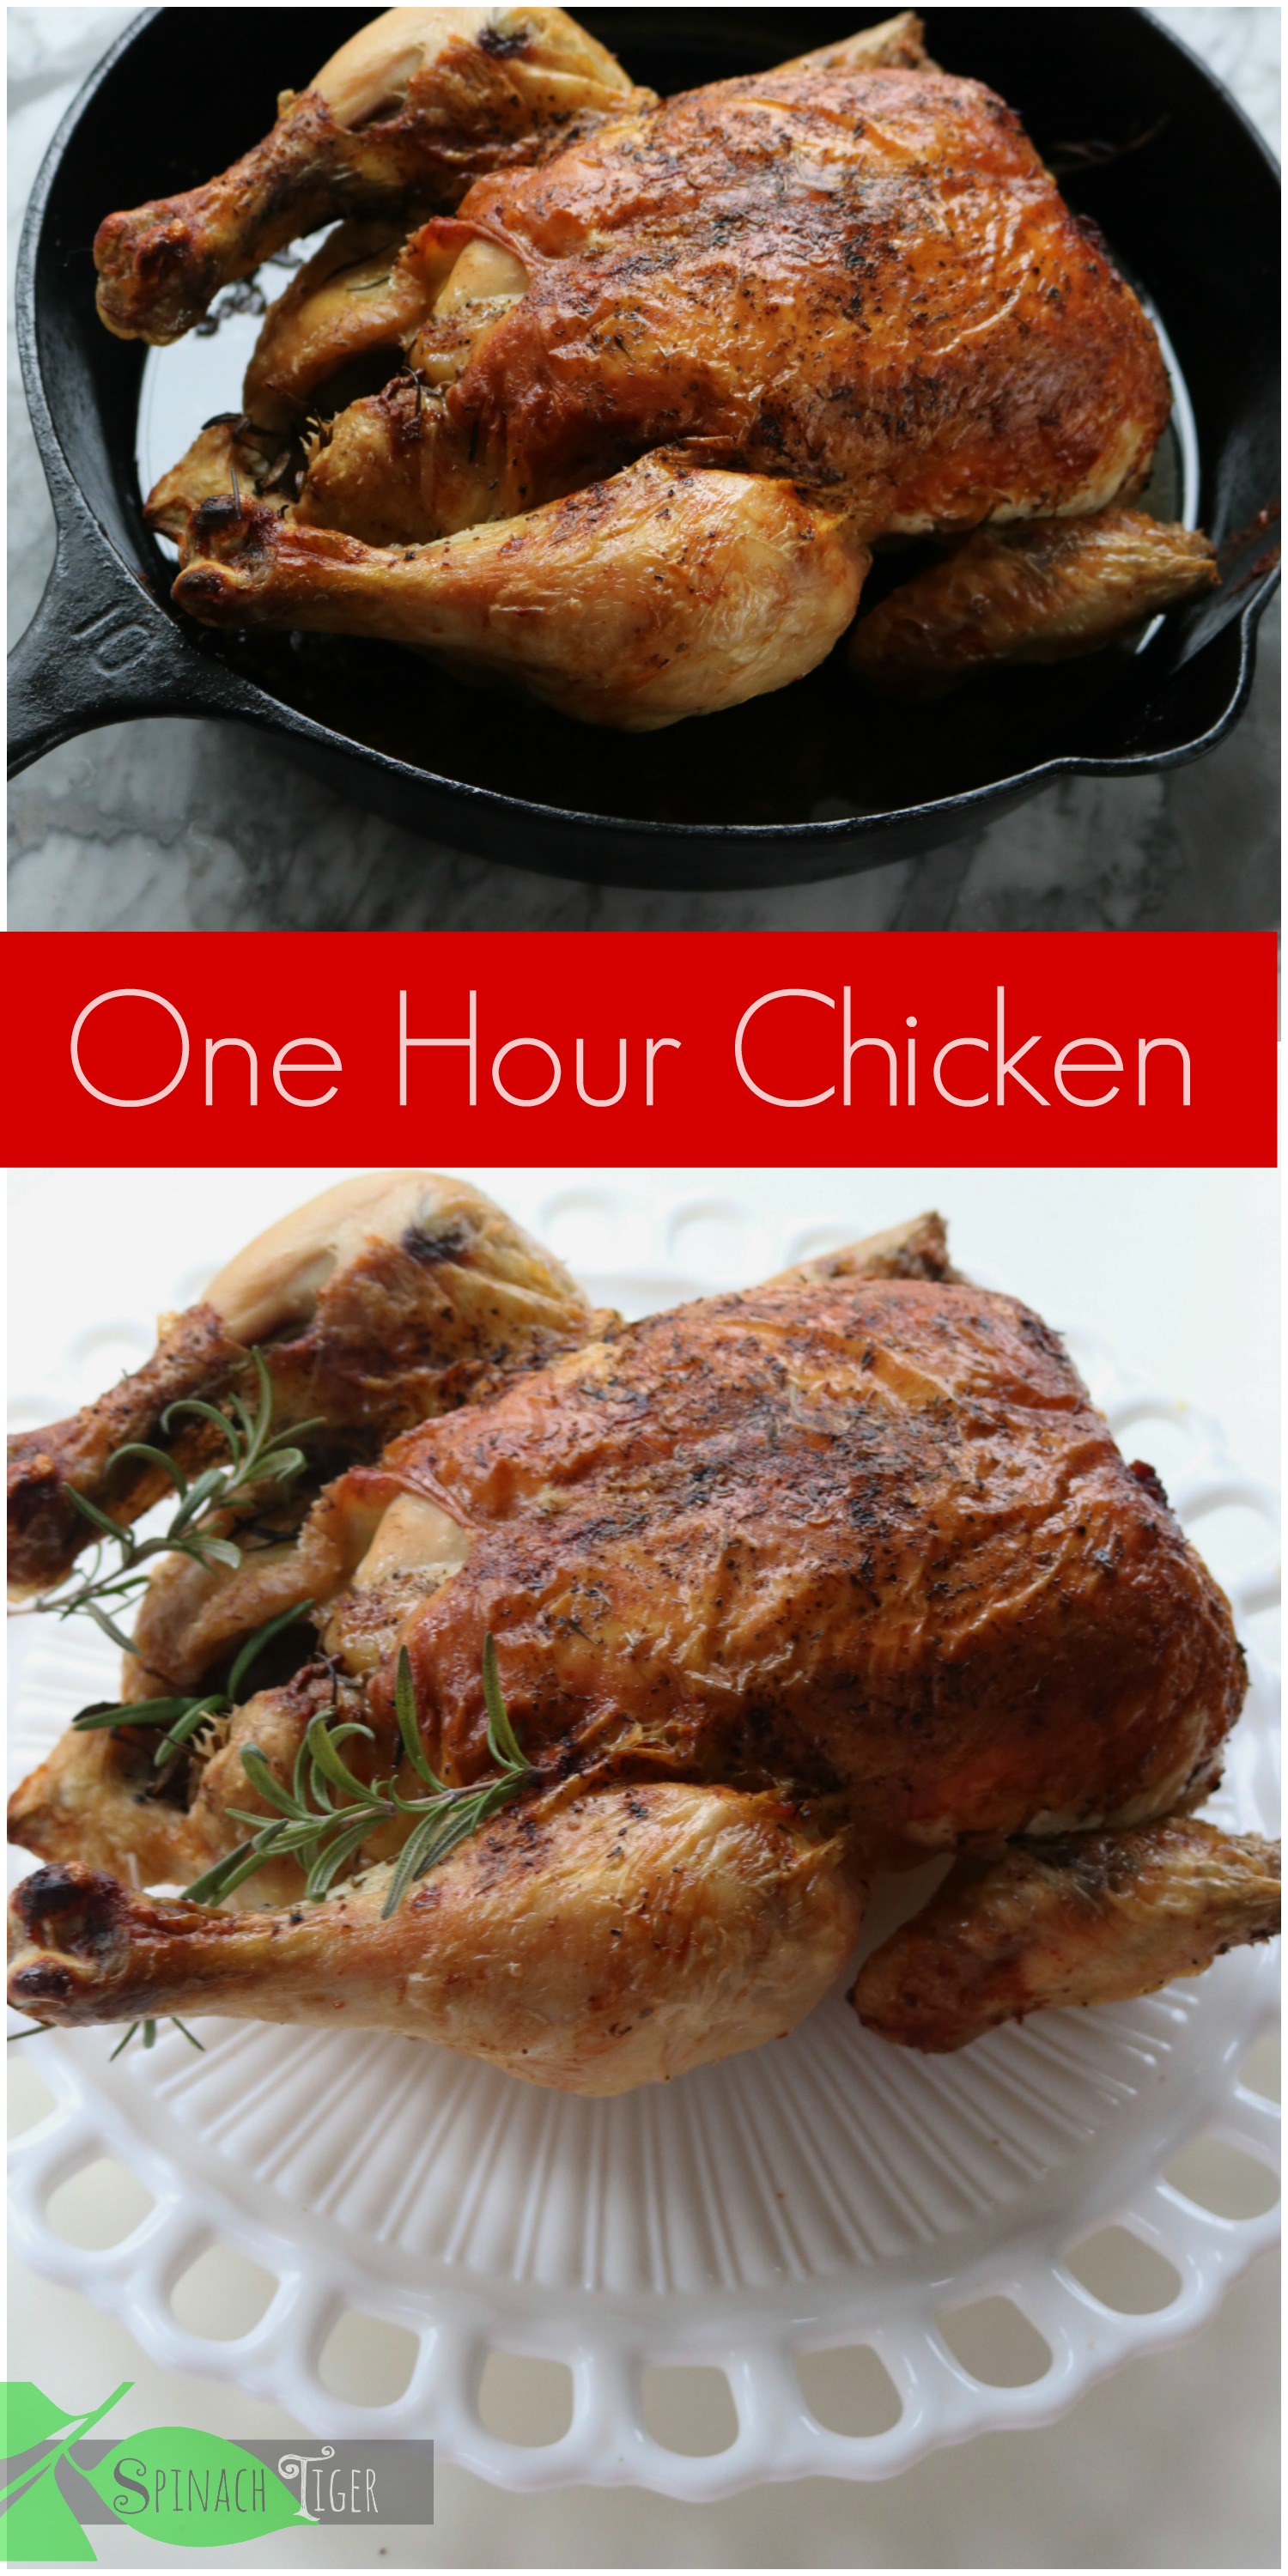 Italian Roast Chicken Recipe and How to Roast Chicken in the Oven from Spinach Tiger